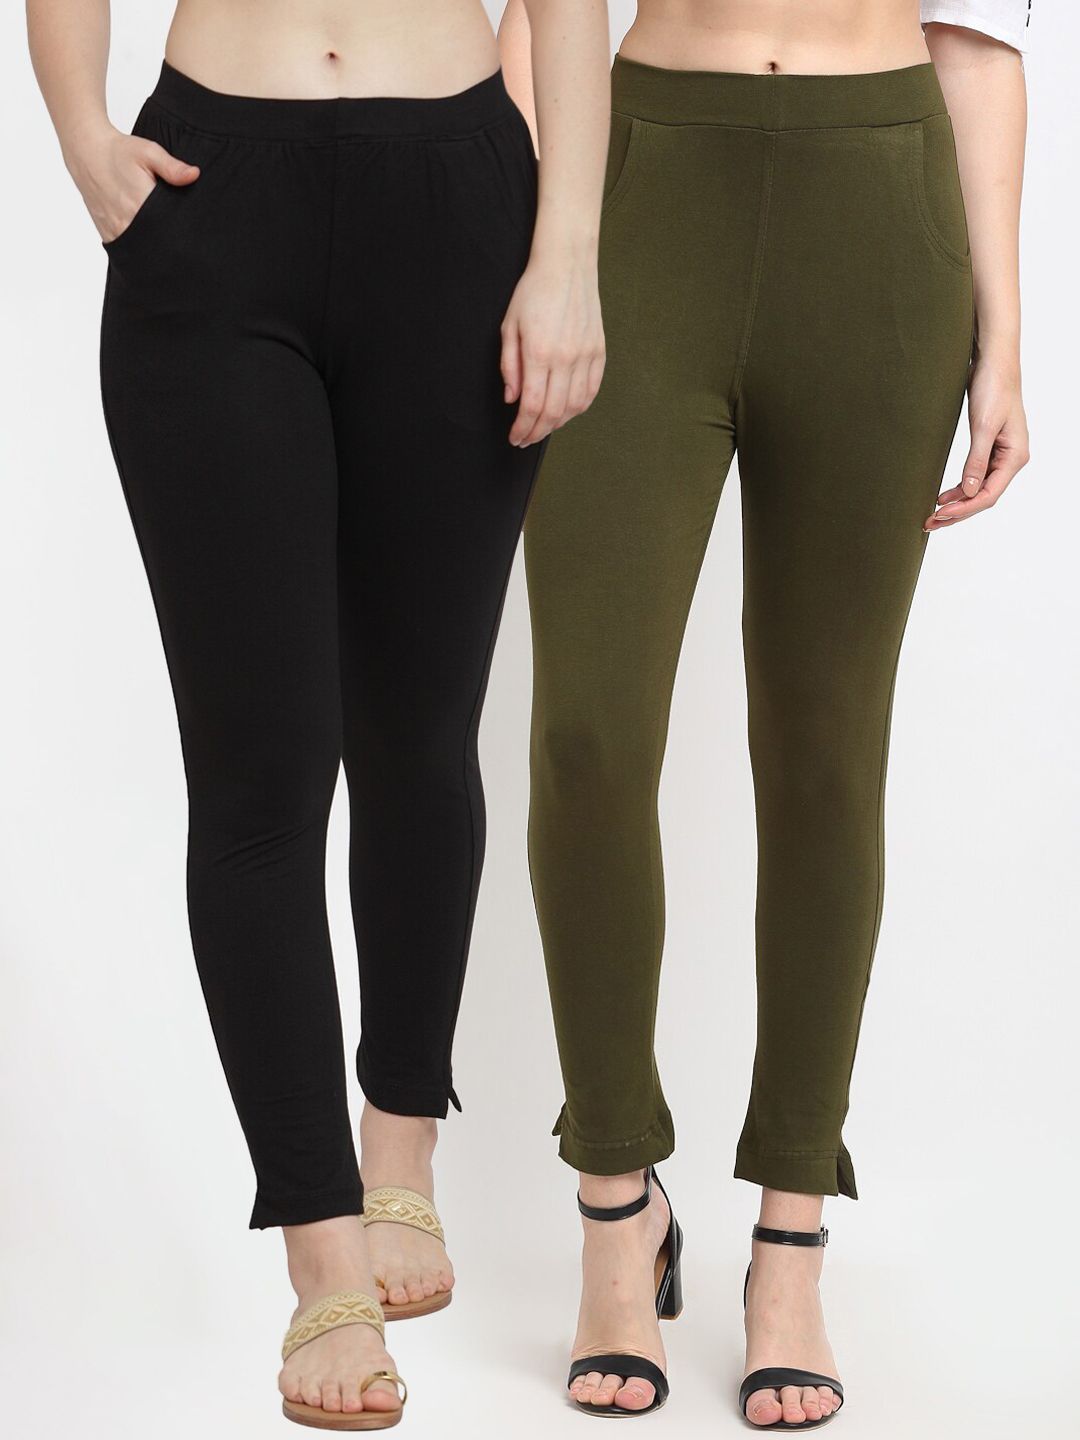 TAG 7 WOMEN Olive Green & Black Pack of 2 Leggings Price in India